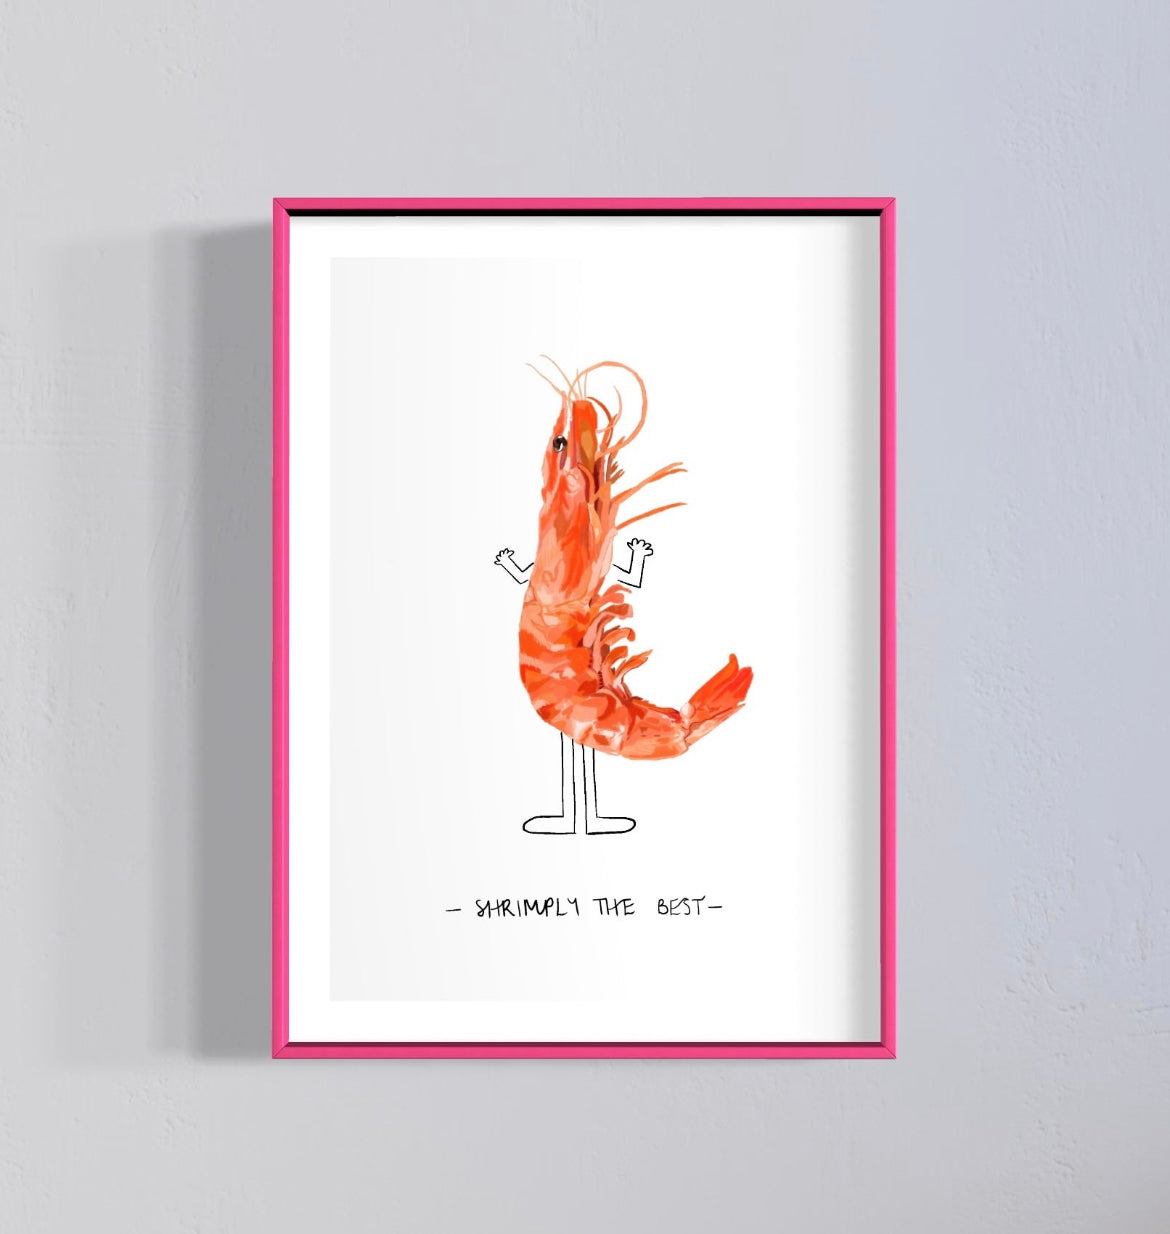 'Shrimply the best' wall art, with a hot pink frame. Drawing of a prawn with human arms and legs